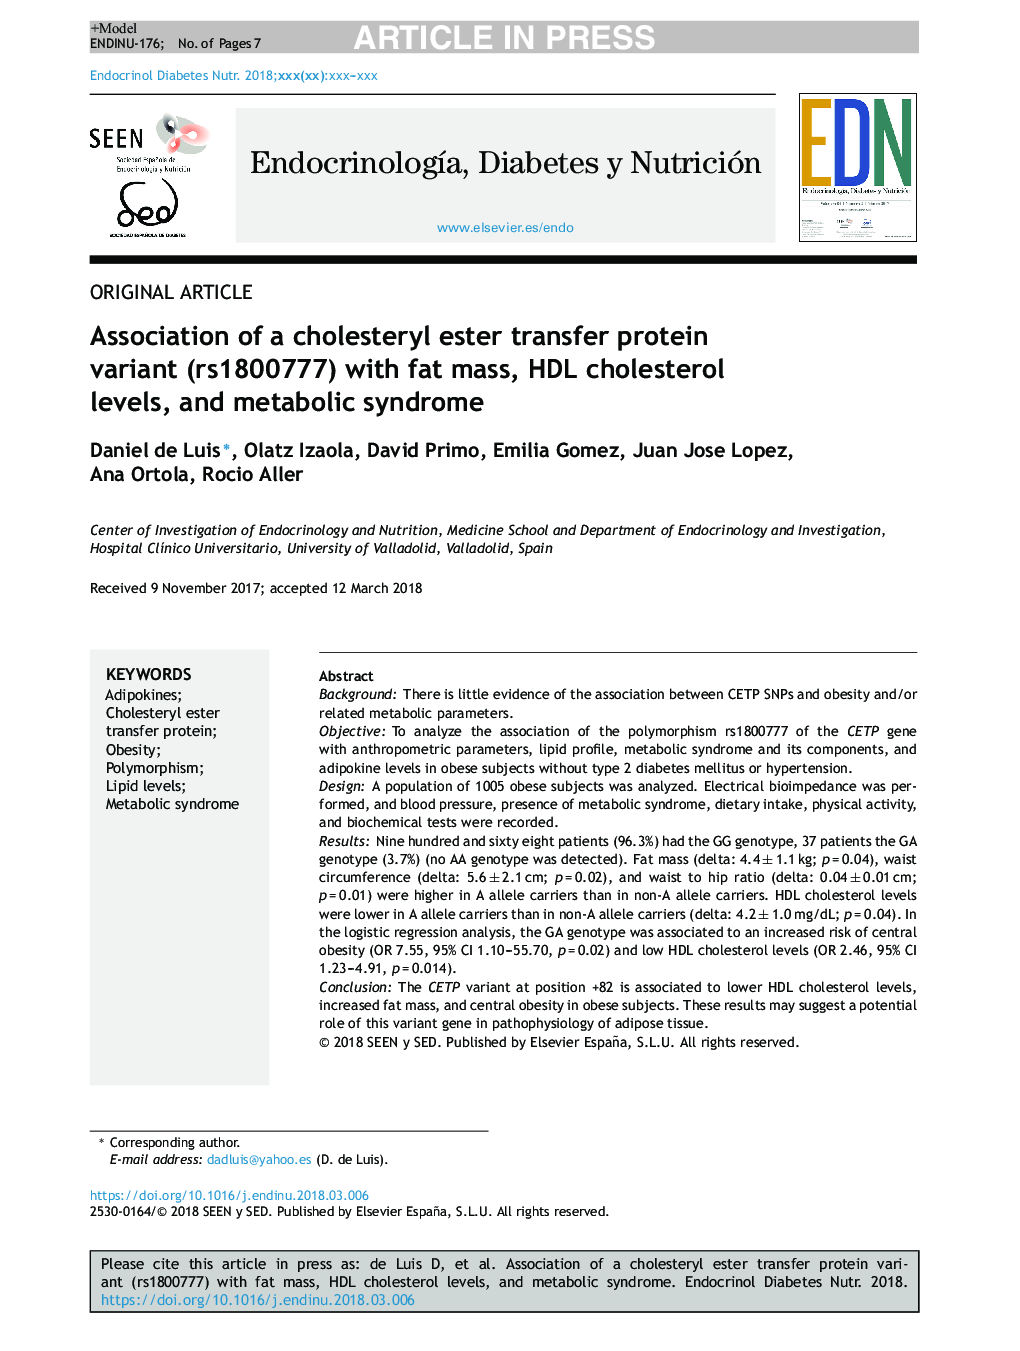 Association of a cholesteryl ester transfer protein variant (rs1800777) with fat mass, HDL cholesterol levels, and metabolic syndrome